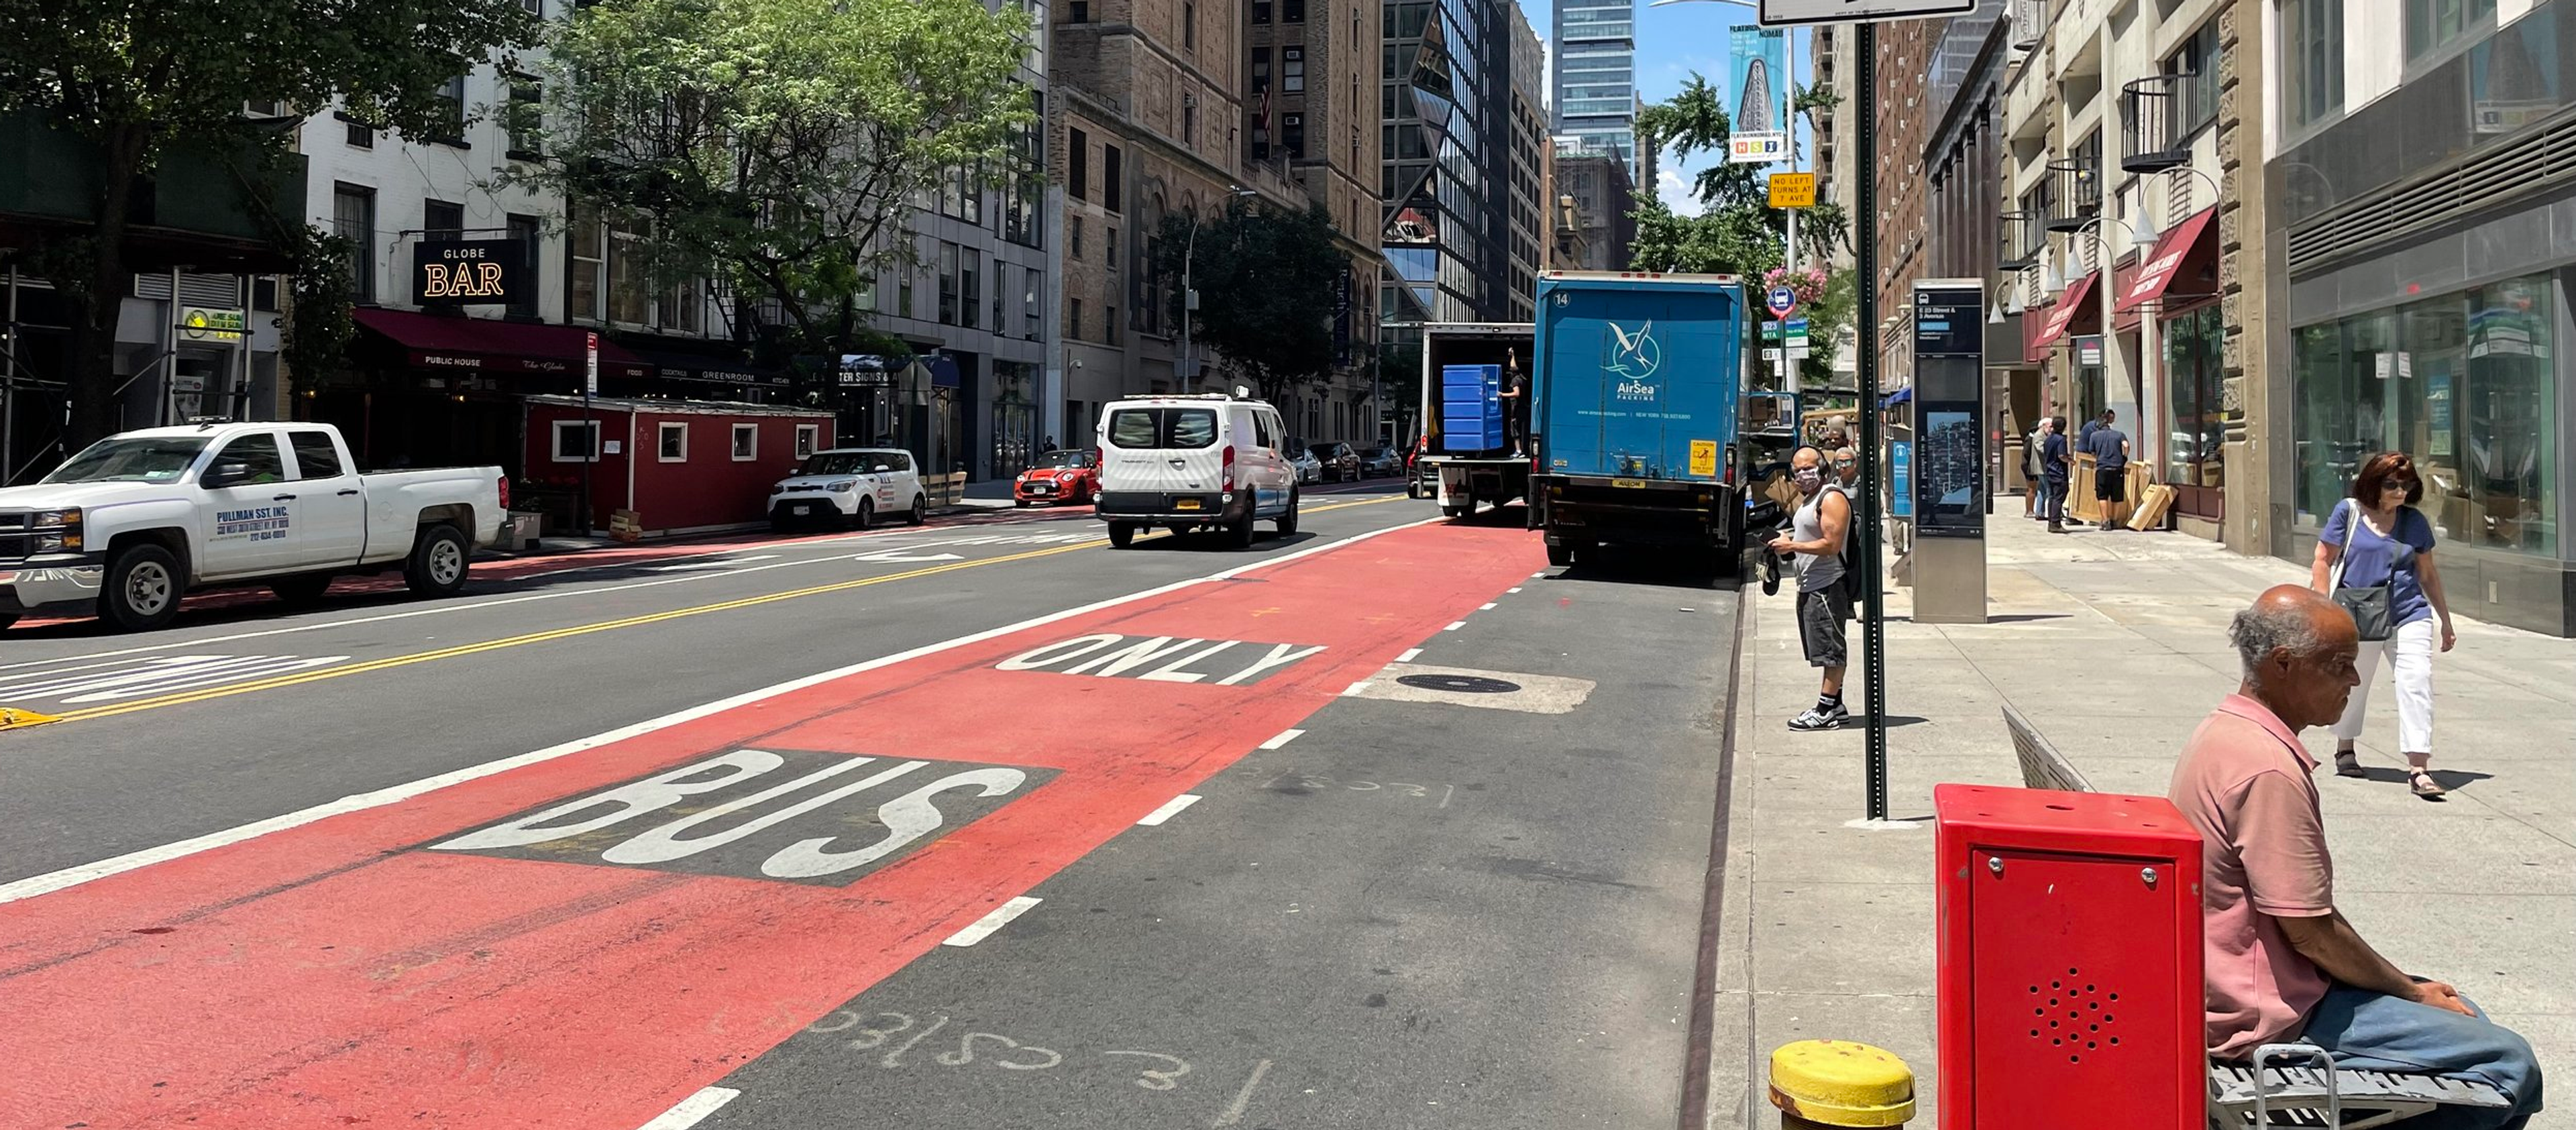 A bus lane on a city street designated by red paint